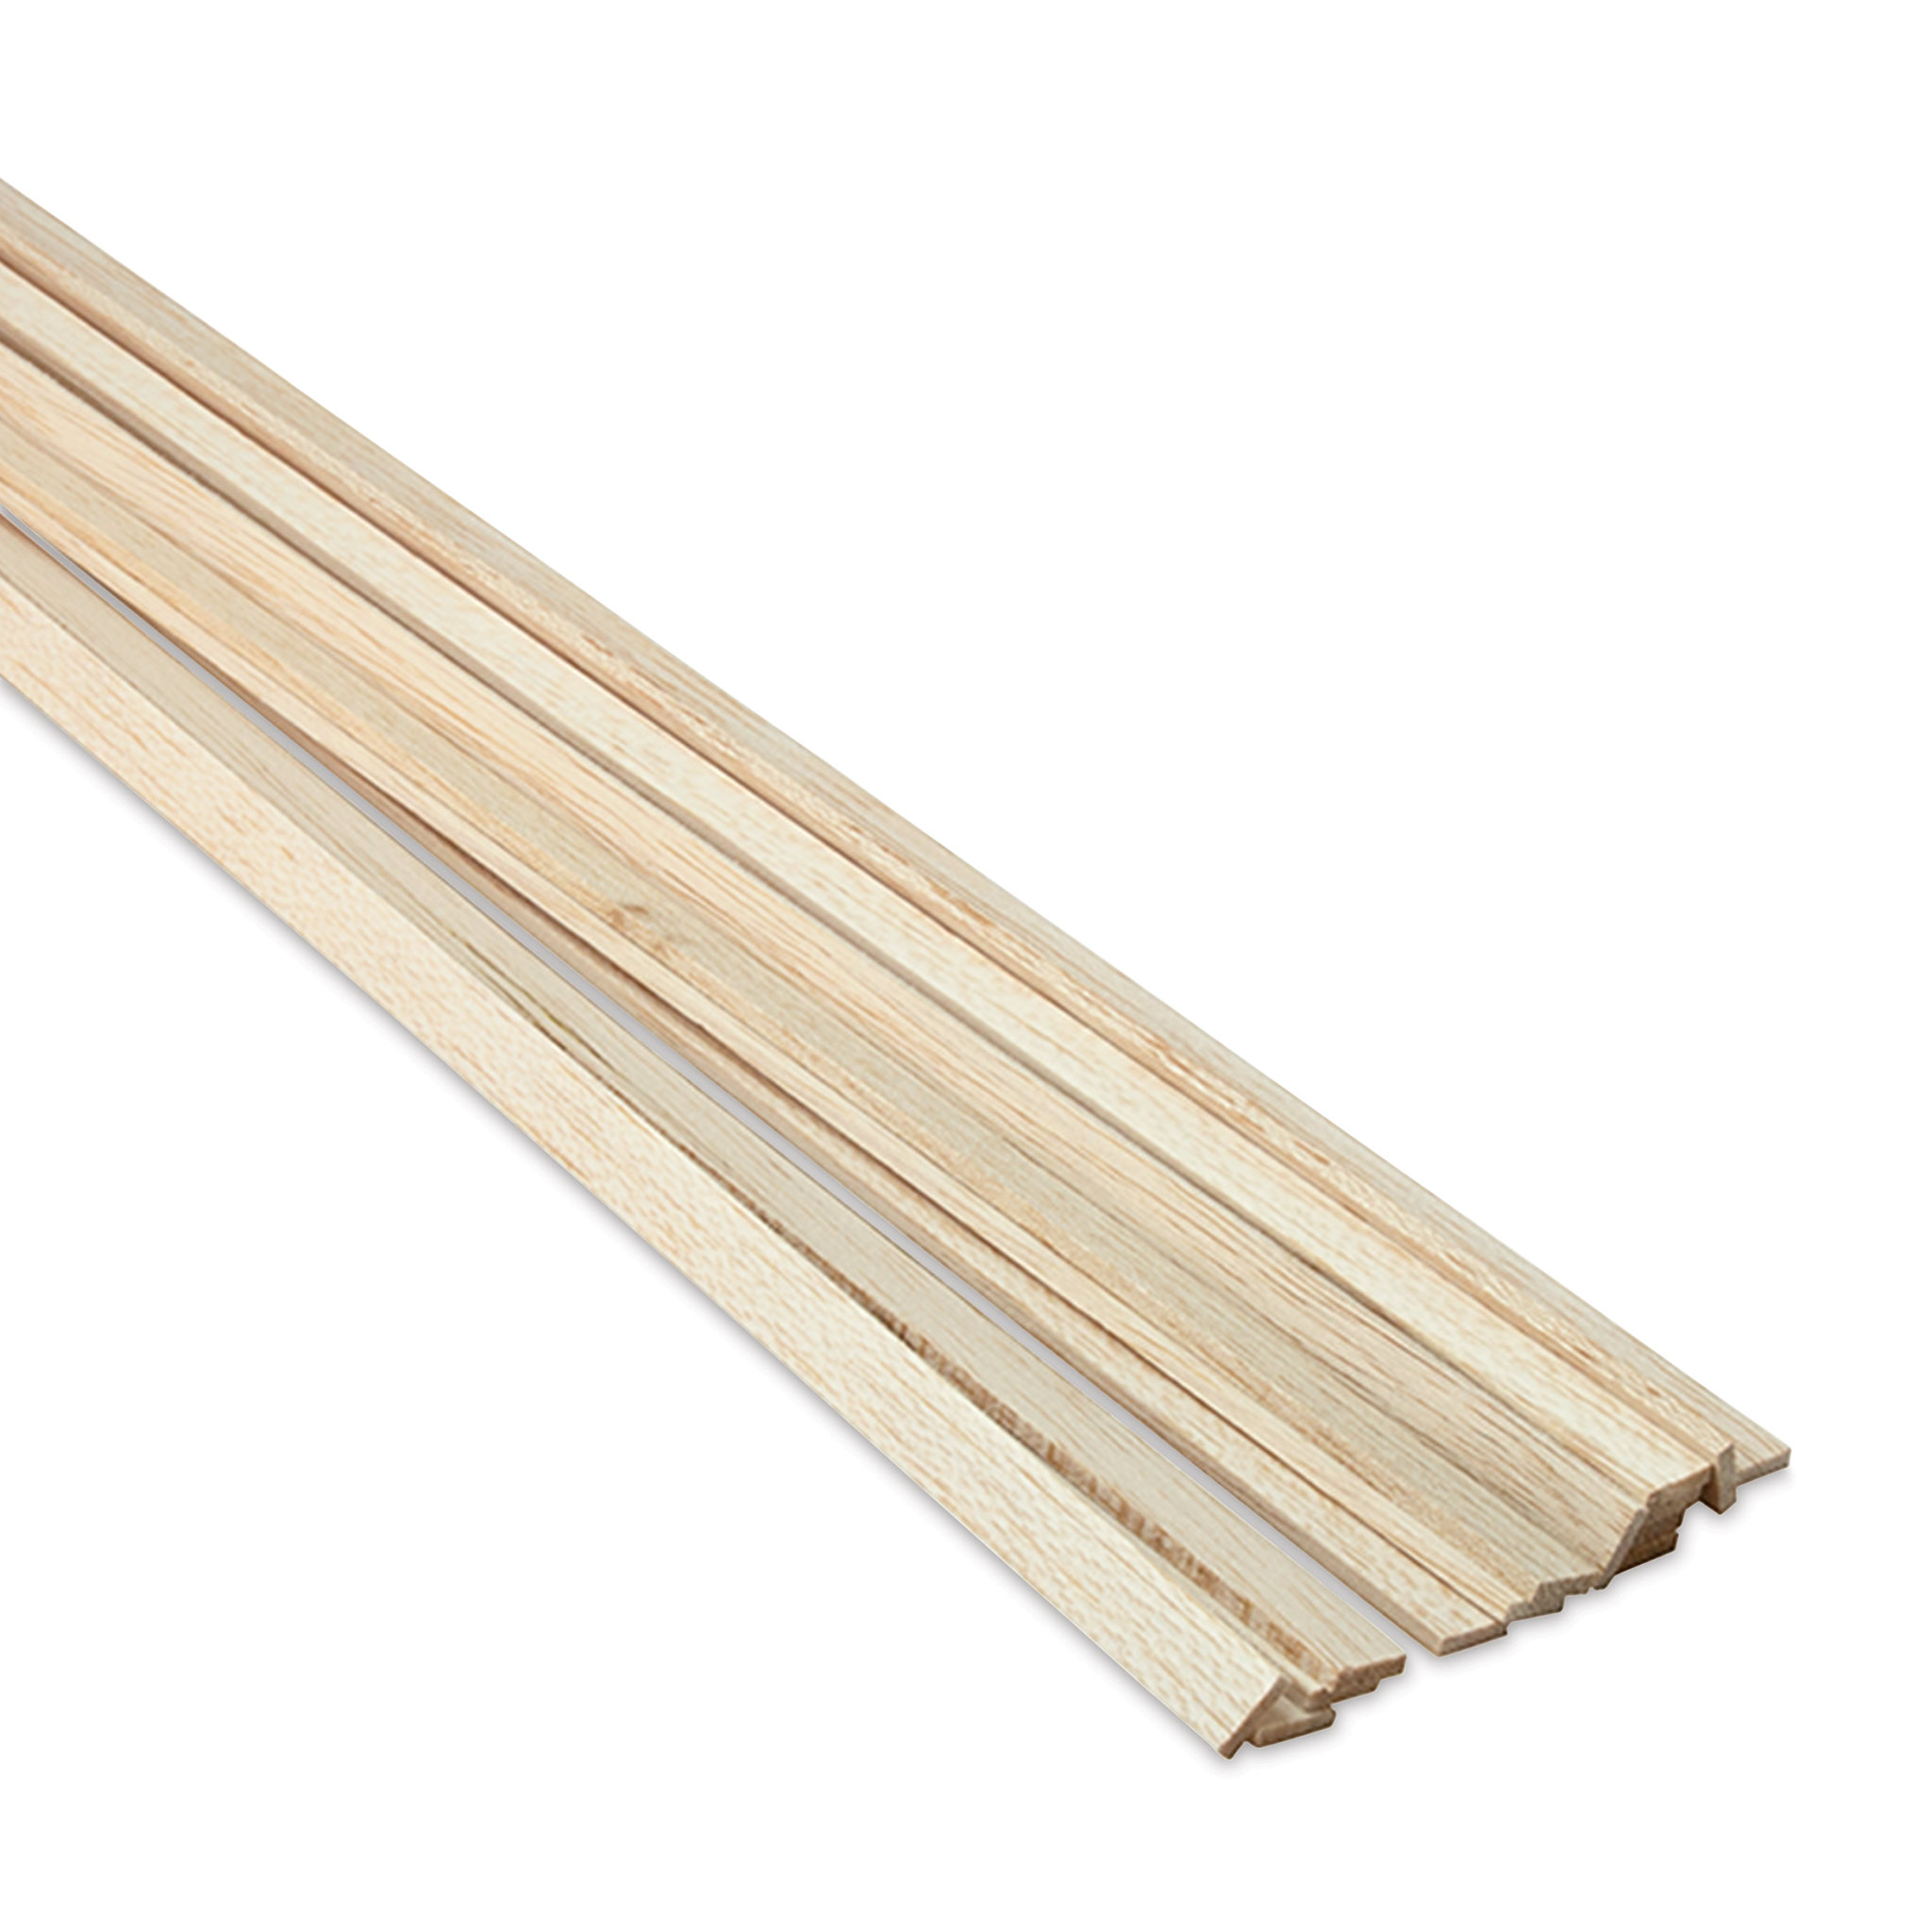 Midwest Products Genuine Balsa Wood Strips- 10 Pieces, 1/4 x 1/4 x 36 